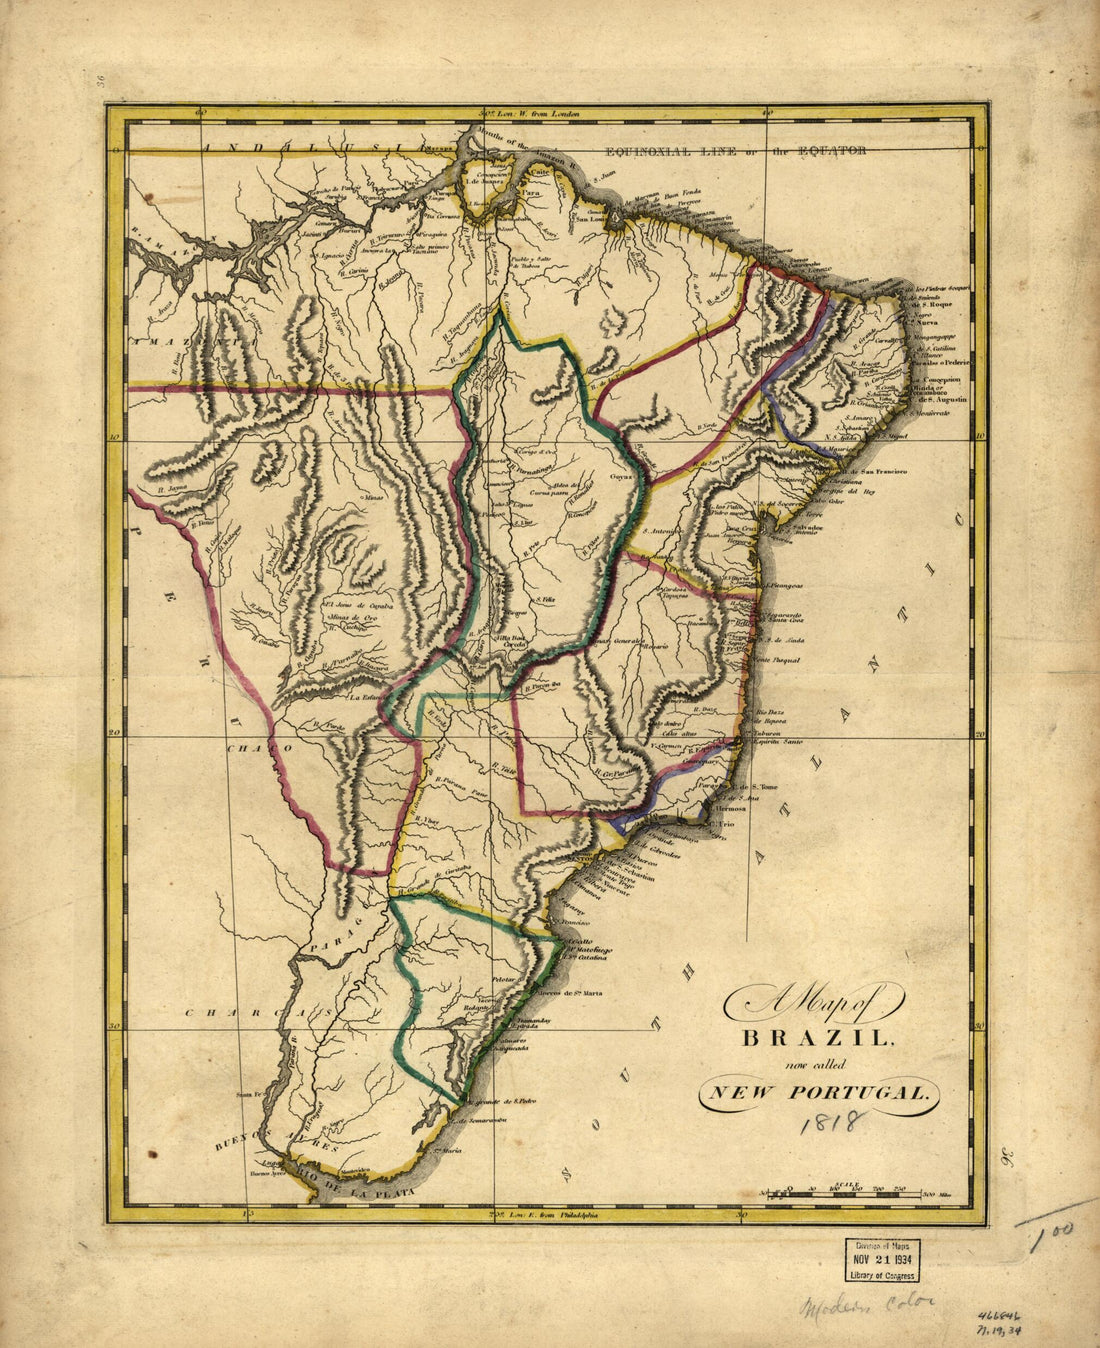 This old map of A Map of Brazil, Now Called New Portugal from 1818 was created by Mathew Carey in 1818